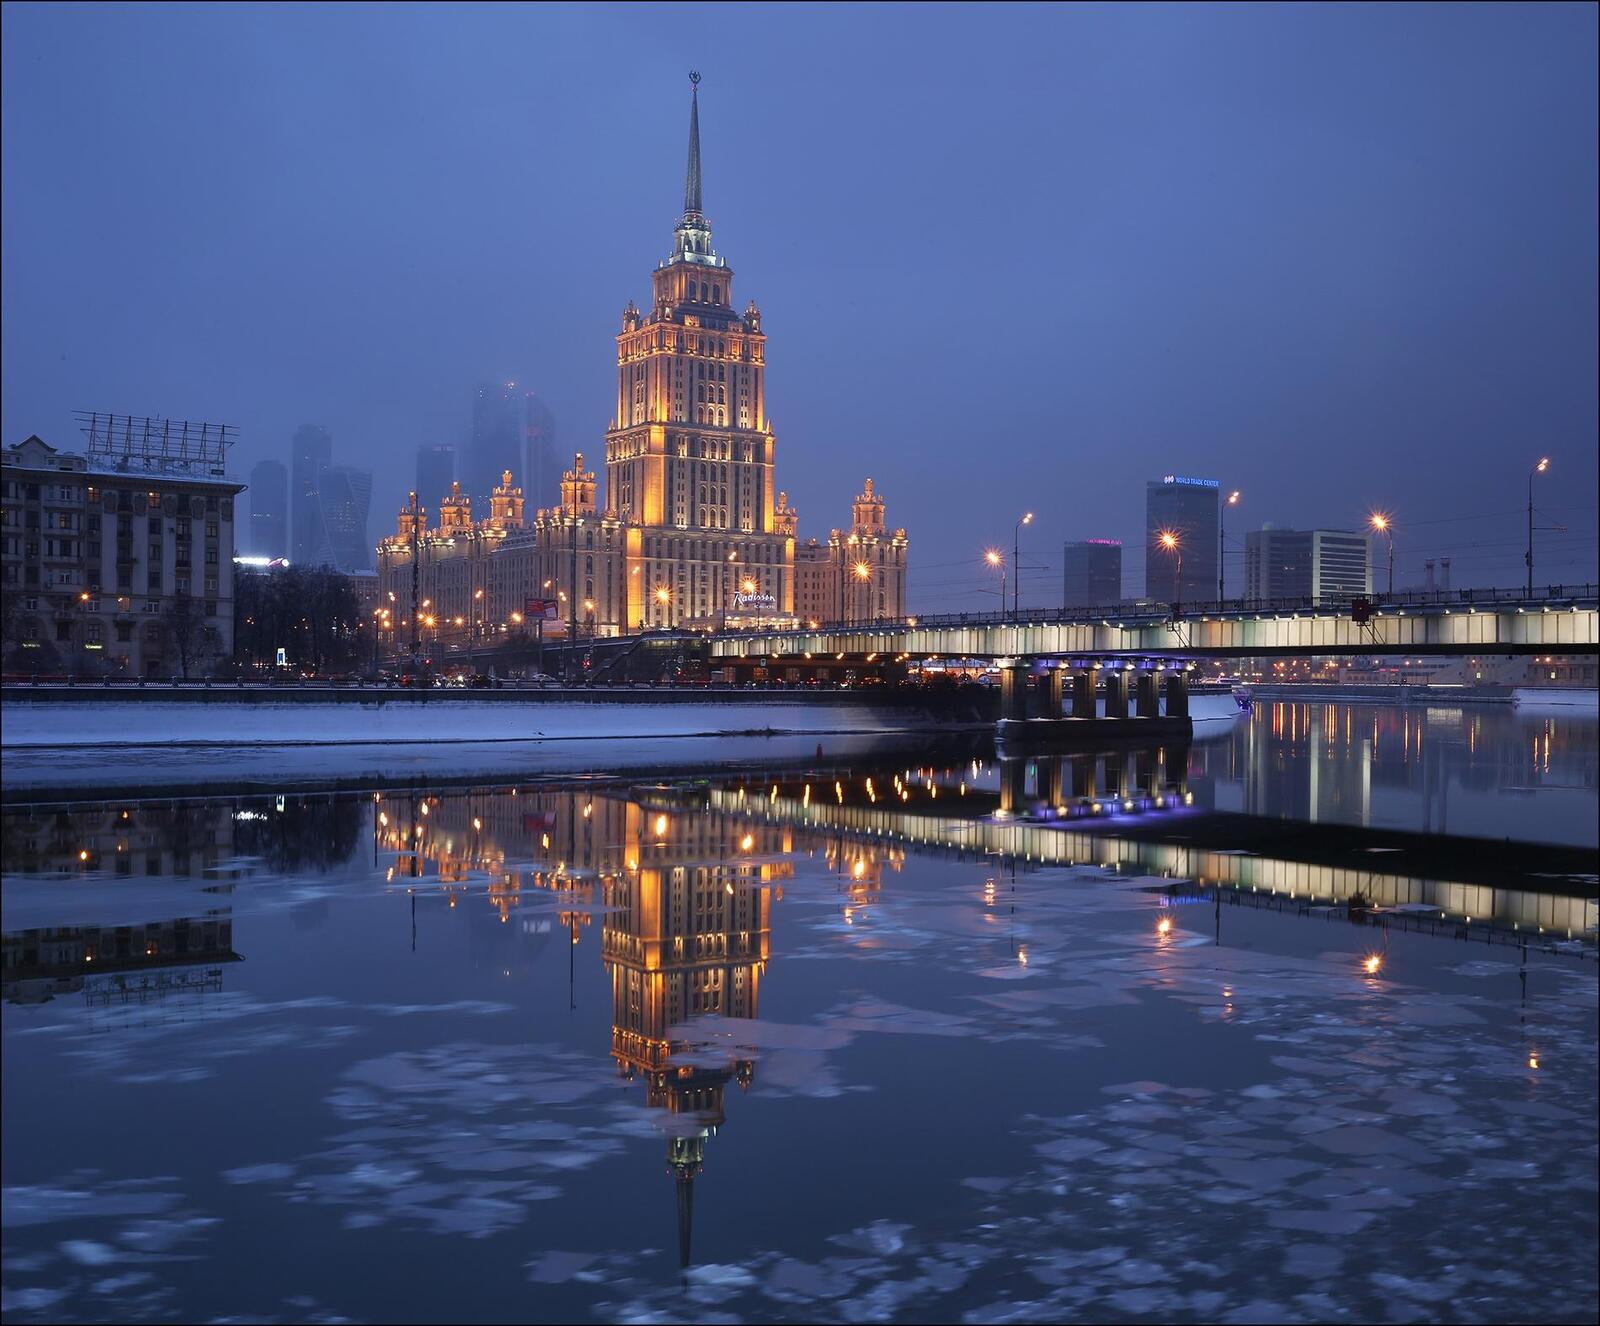 Wallpapers Hotel Radisson Royal Hotel Moscow Russia on the desktop